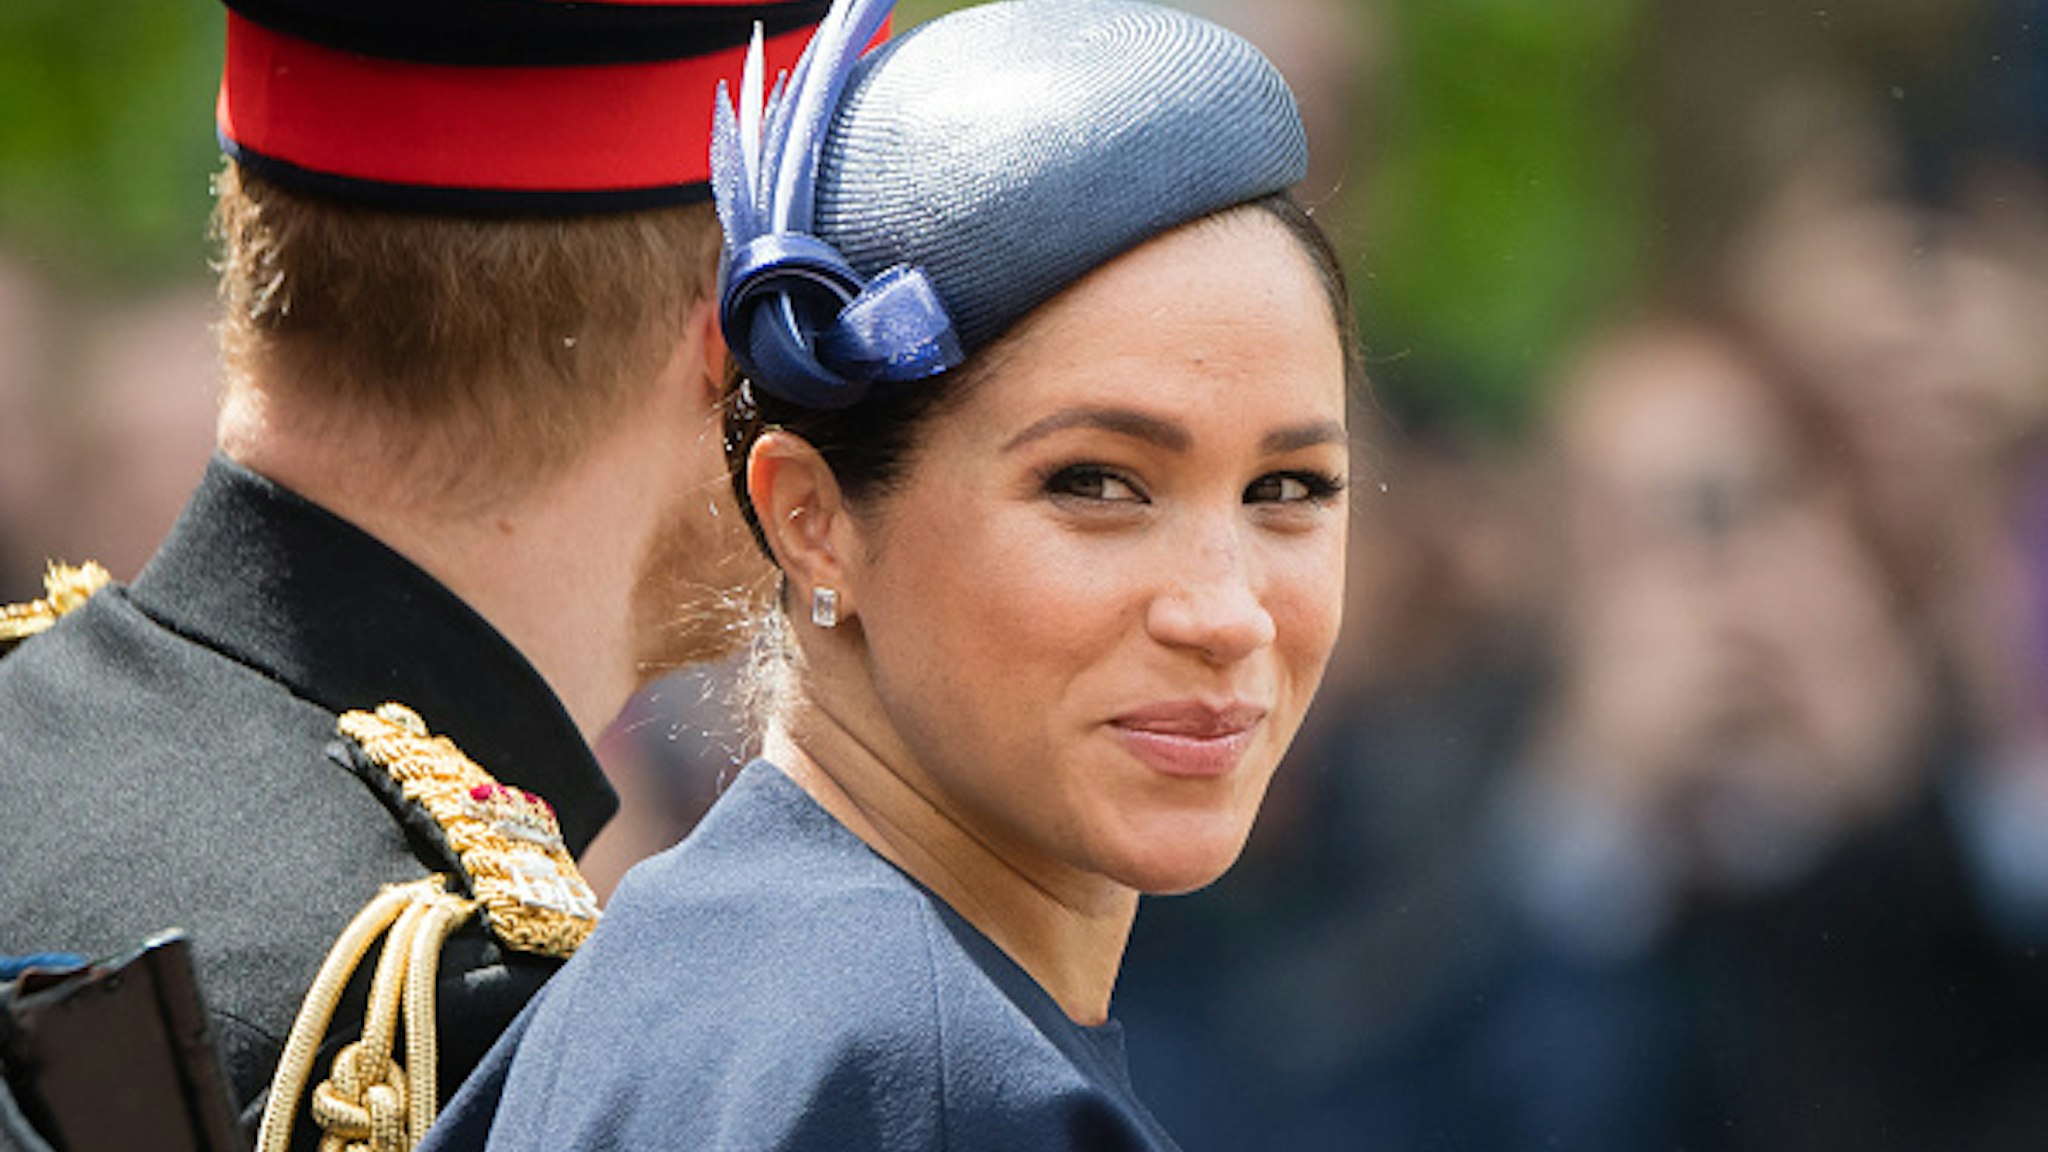 LONDON, ENGLAND - JUNE 08: Meghan, Duchess of Sussex rides by carriage down the Mall during Trooping The Colour, the Queen's annual birthday parade, on June 08, 2019 in London, England. (Photo by Samir Hussein/Samir Hussein/WireImage)